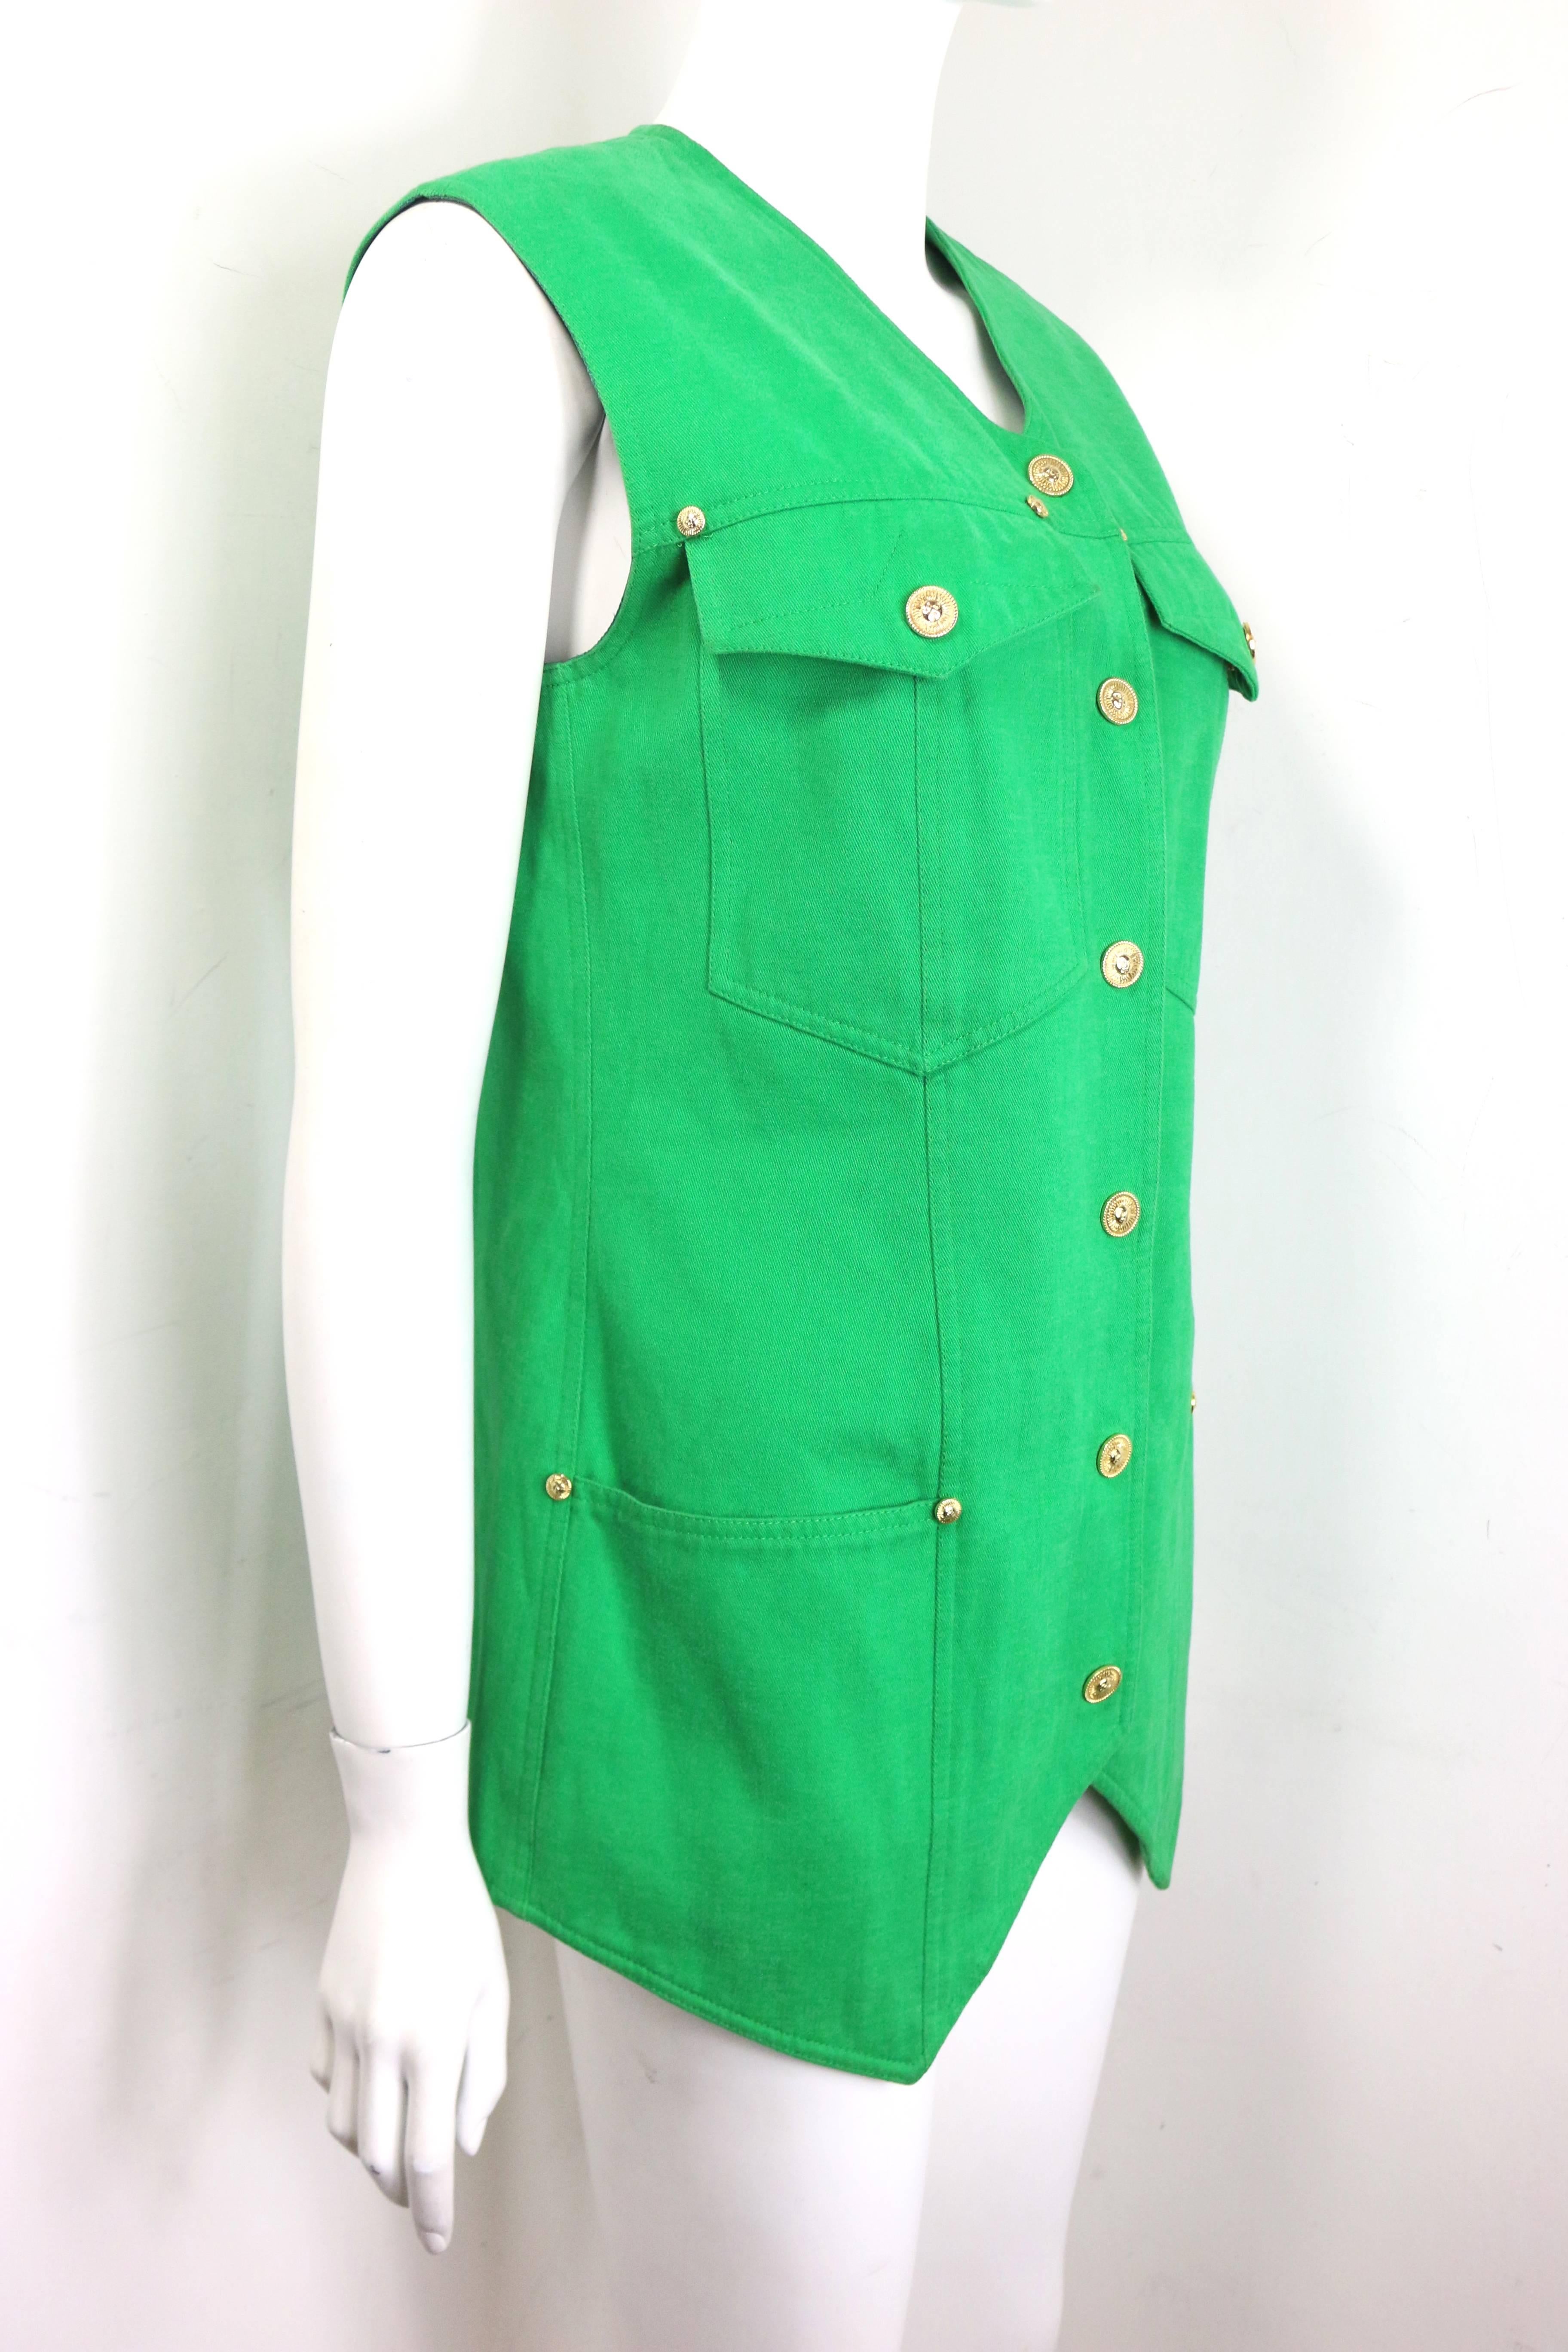 - Gianni Versace Jeans Couture green cotton collarless vest. 

- Embedded with gold toned hardware studs. 

- Gold toned hardware snap buttons closure. 

- Two front flap pockets with gold toned hardware buttons closure and two open pockets.

- Size